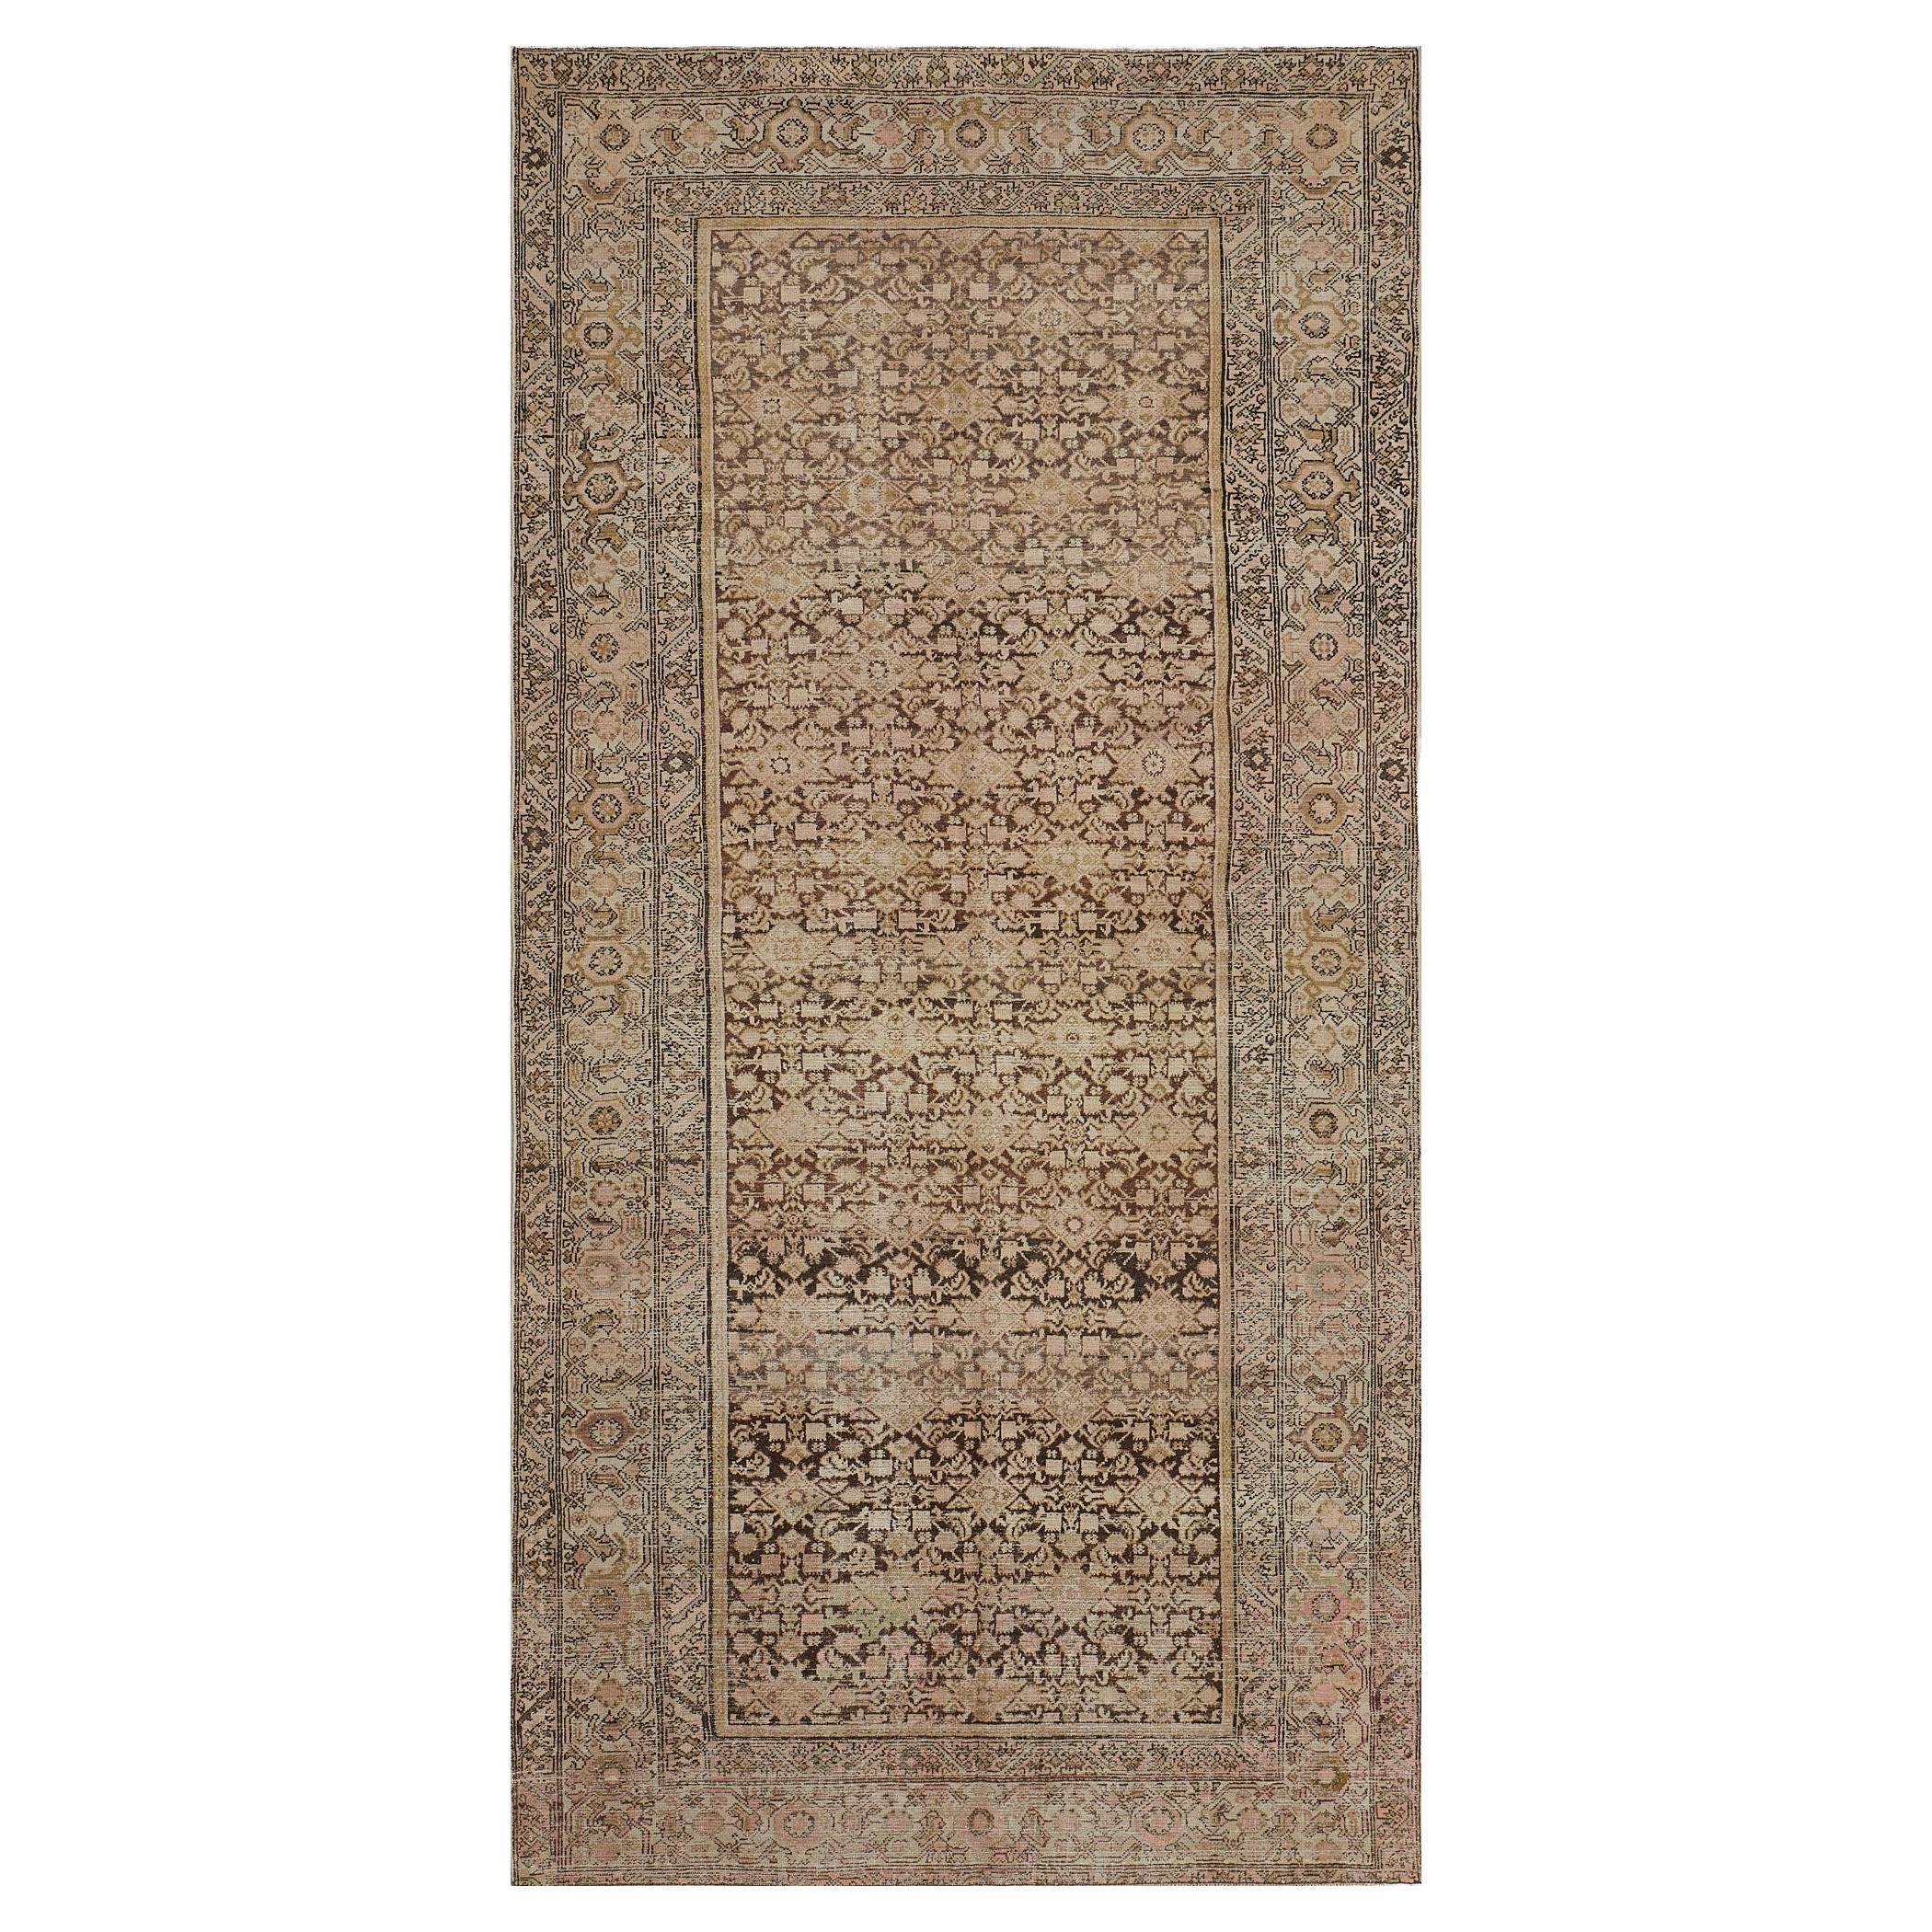 Antique Circa-1900 Wool Hand-Knotted Persian Malayer rug